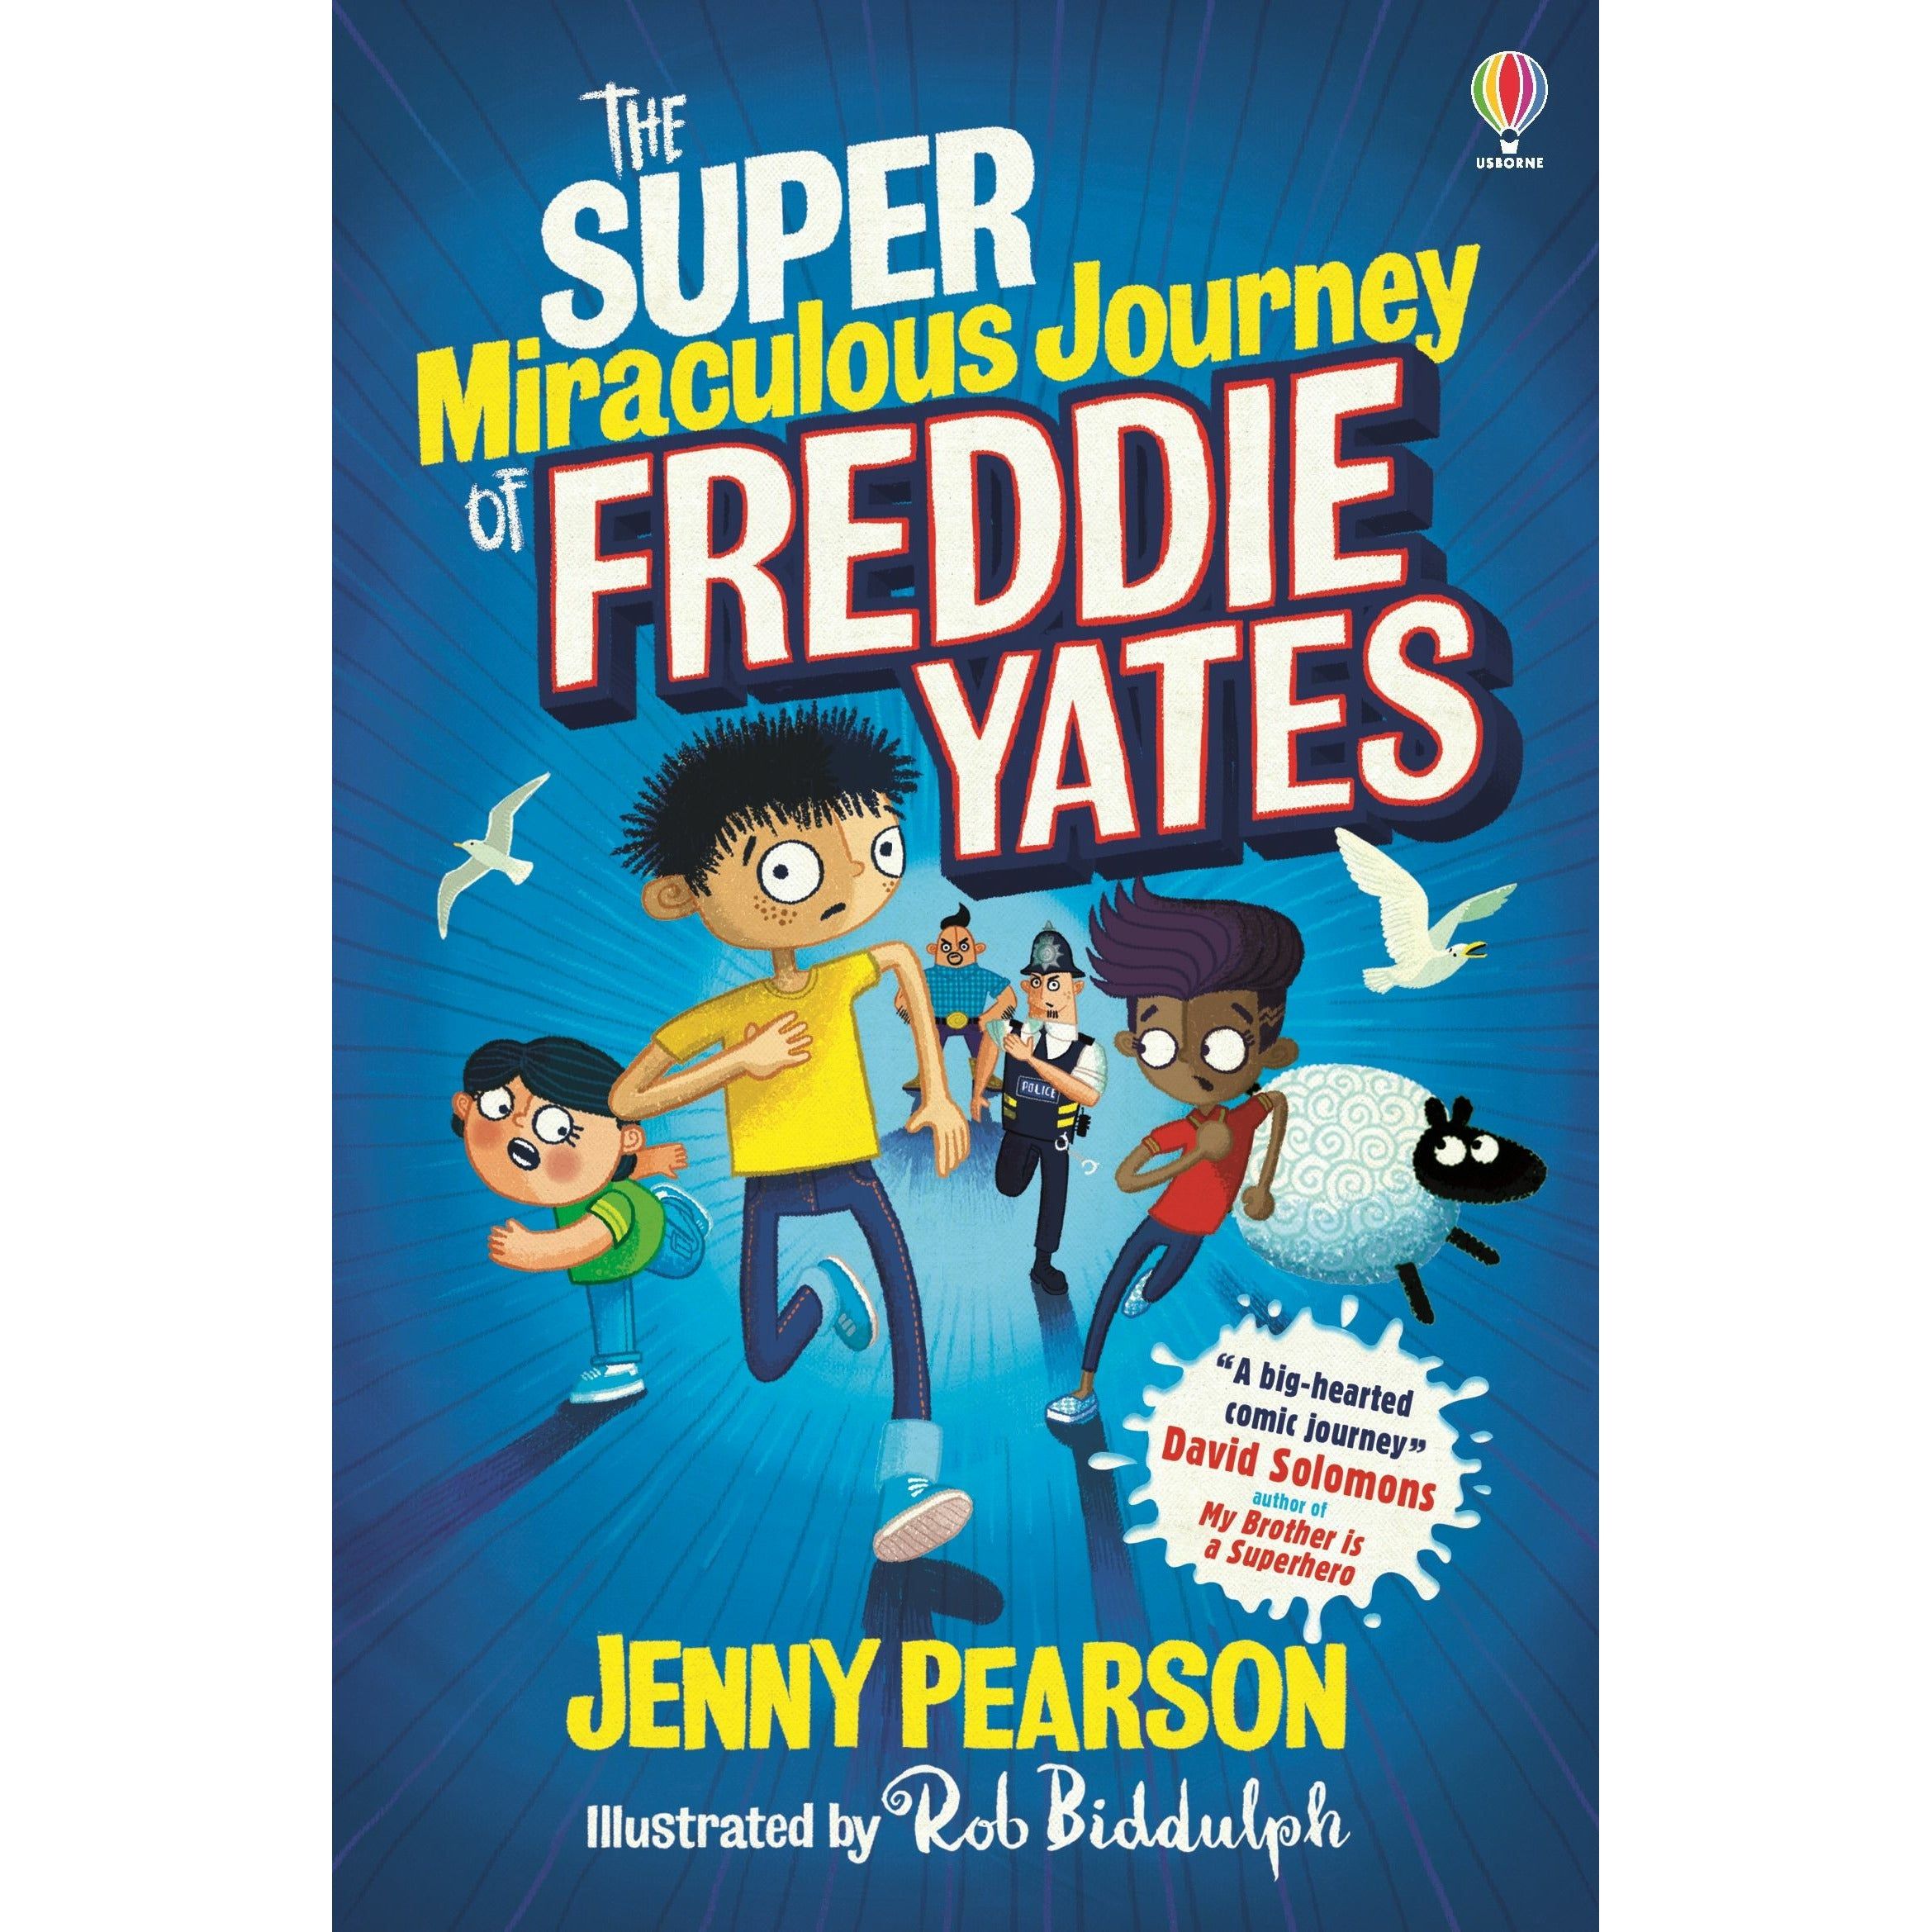 The Super Miraculous Journey of Freddie Yates -  Jenny Pearson